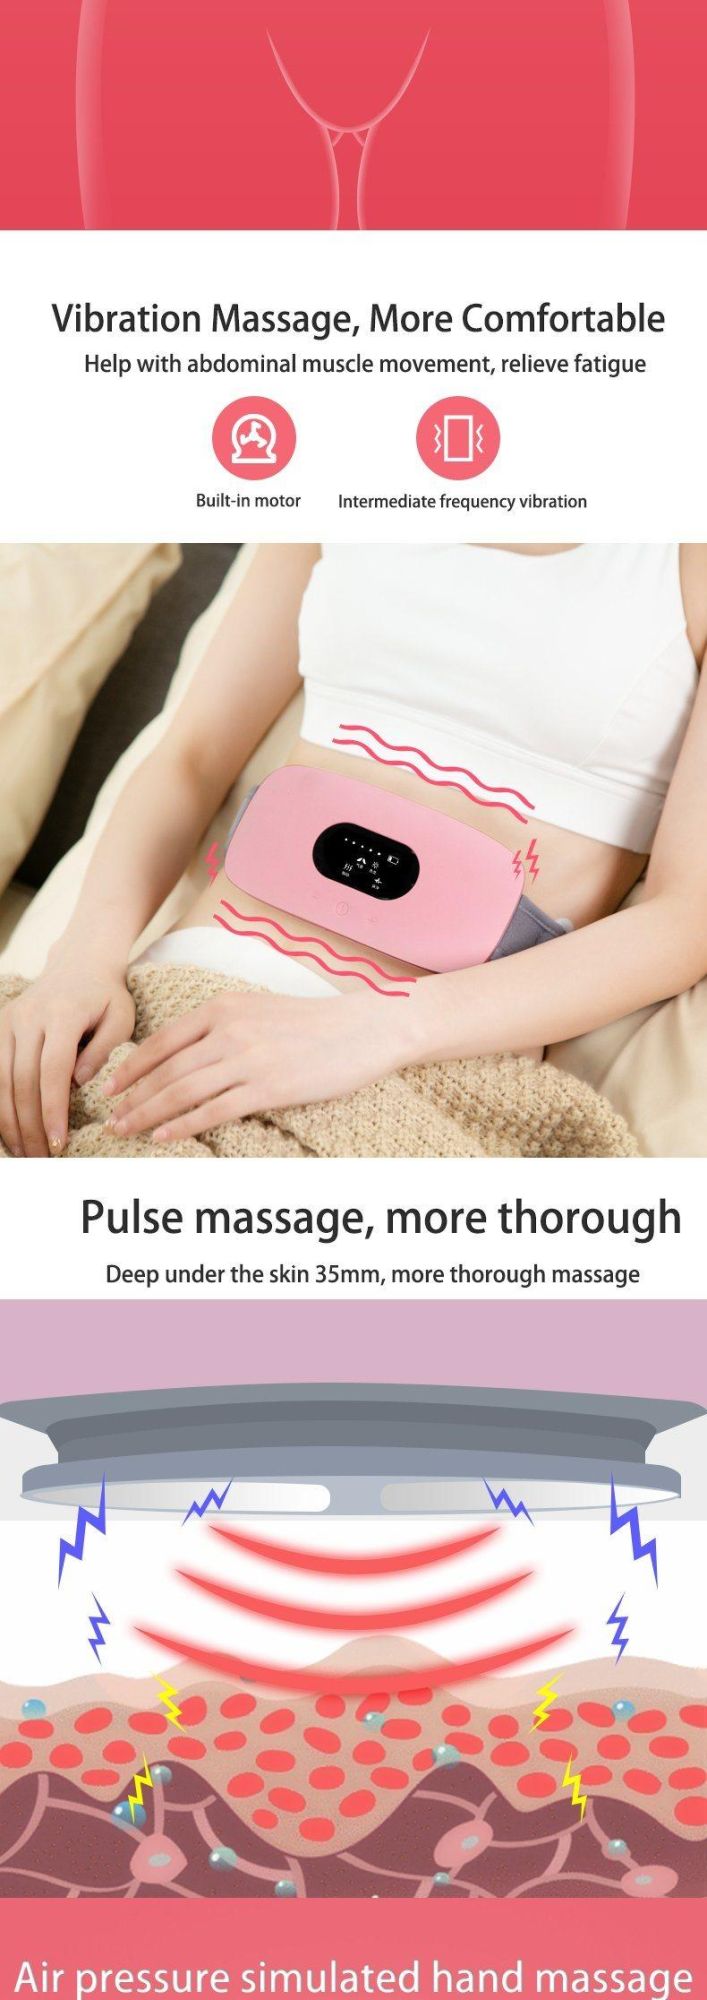 Hezheng Electric Back Belly Full Body Fat Burning Kneading Massage Equipment Vibrating Heating Weight Loss Slimming Belt Massager